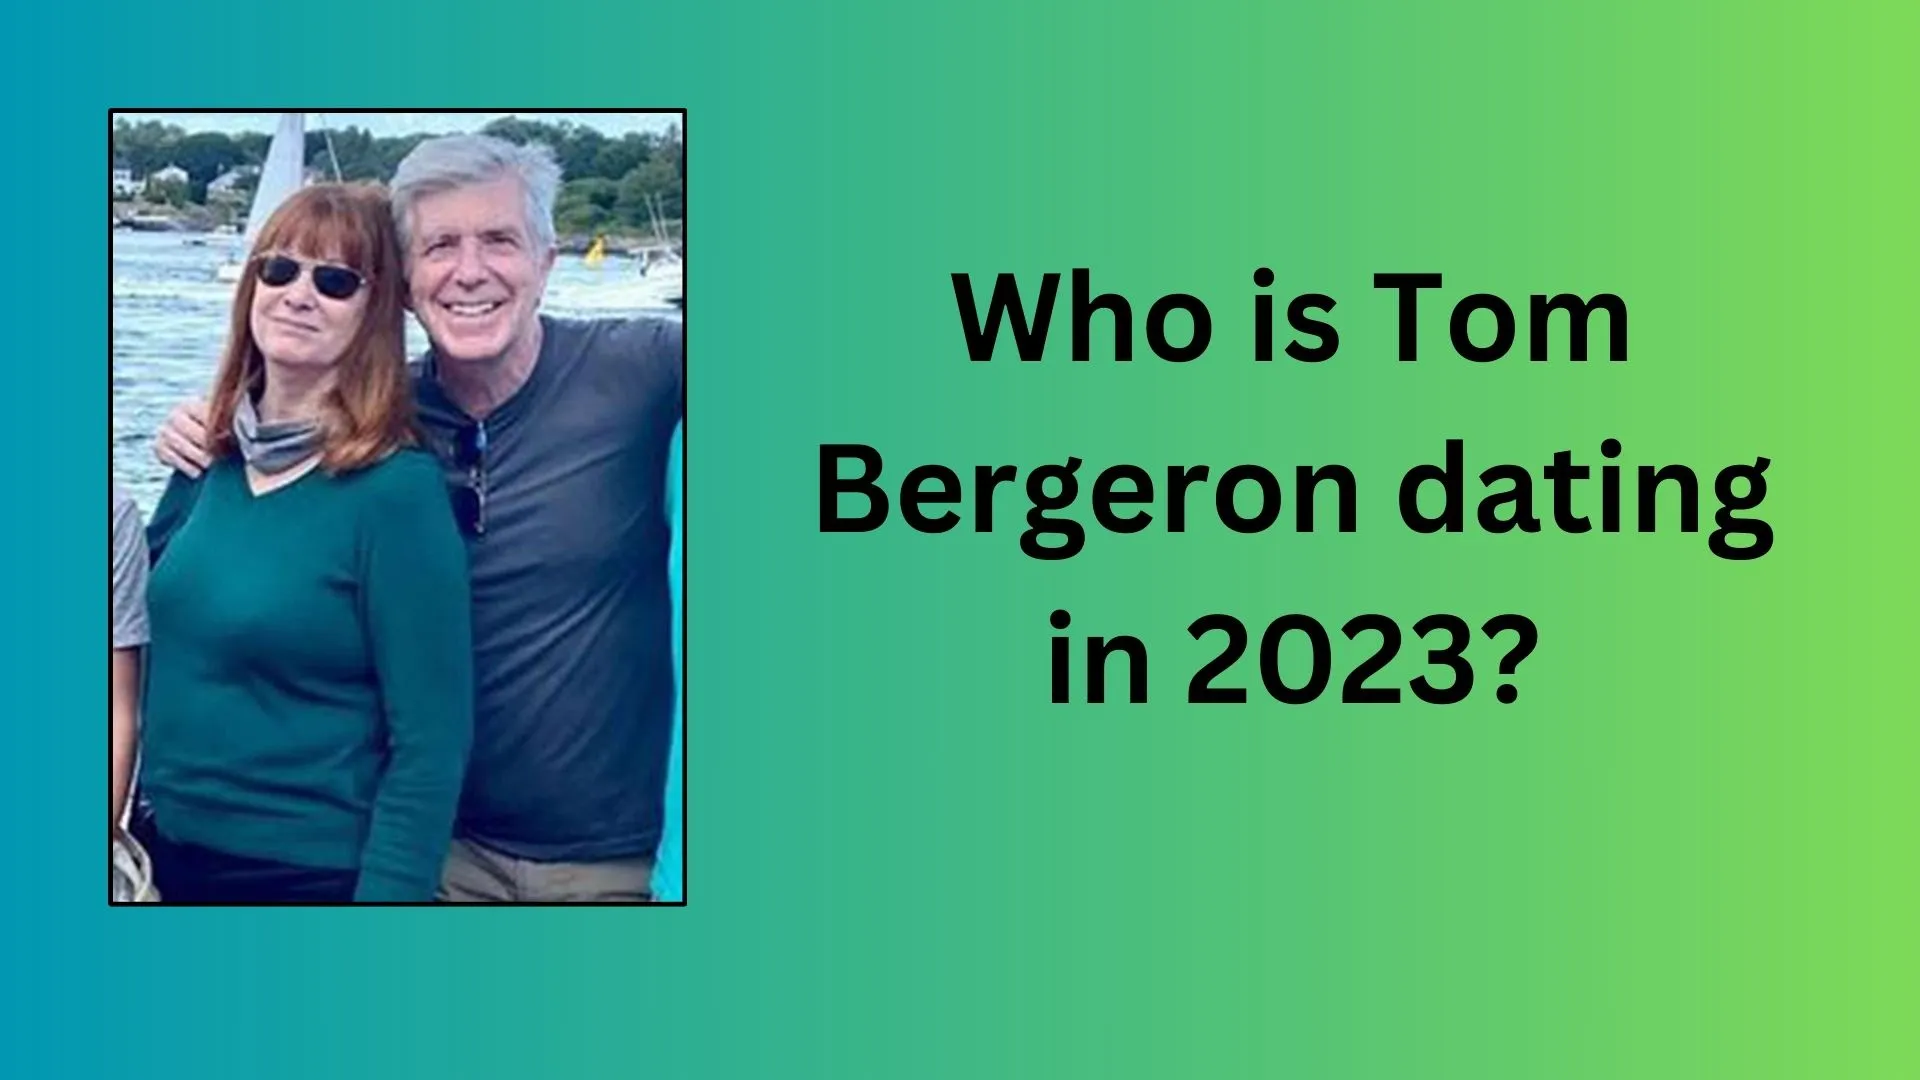 Who is Tom Bergeron dating in 2023